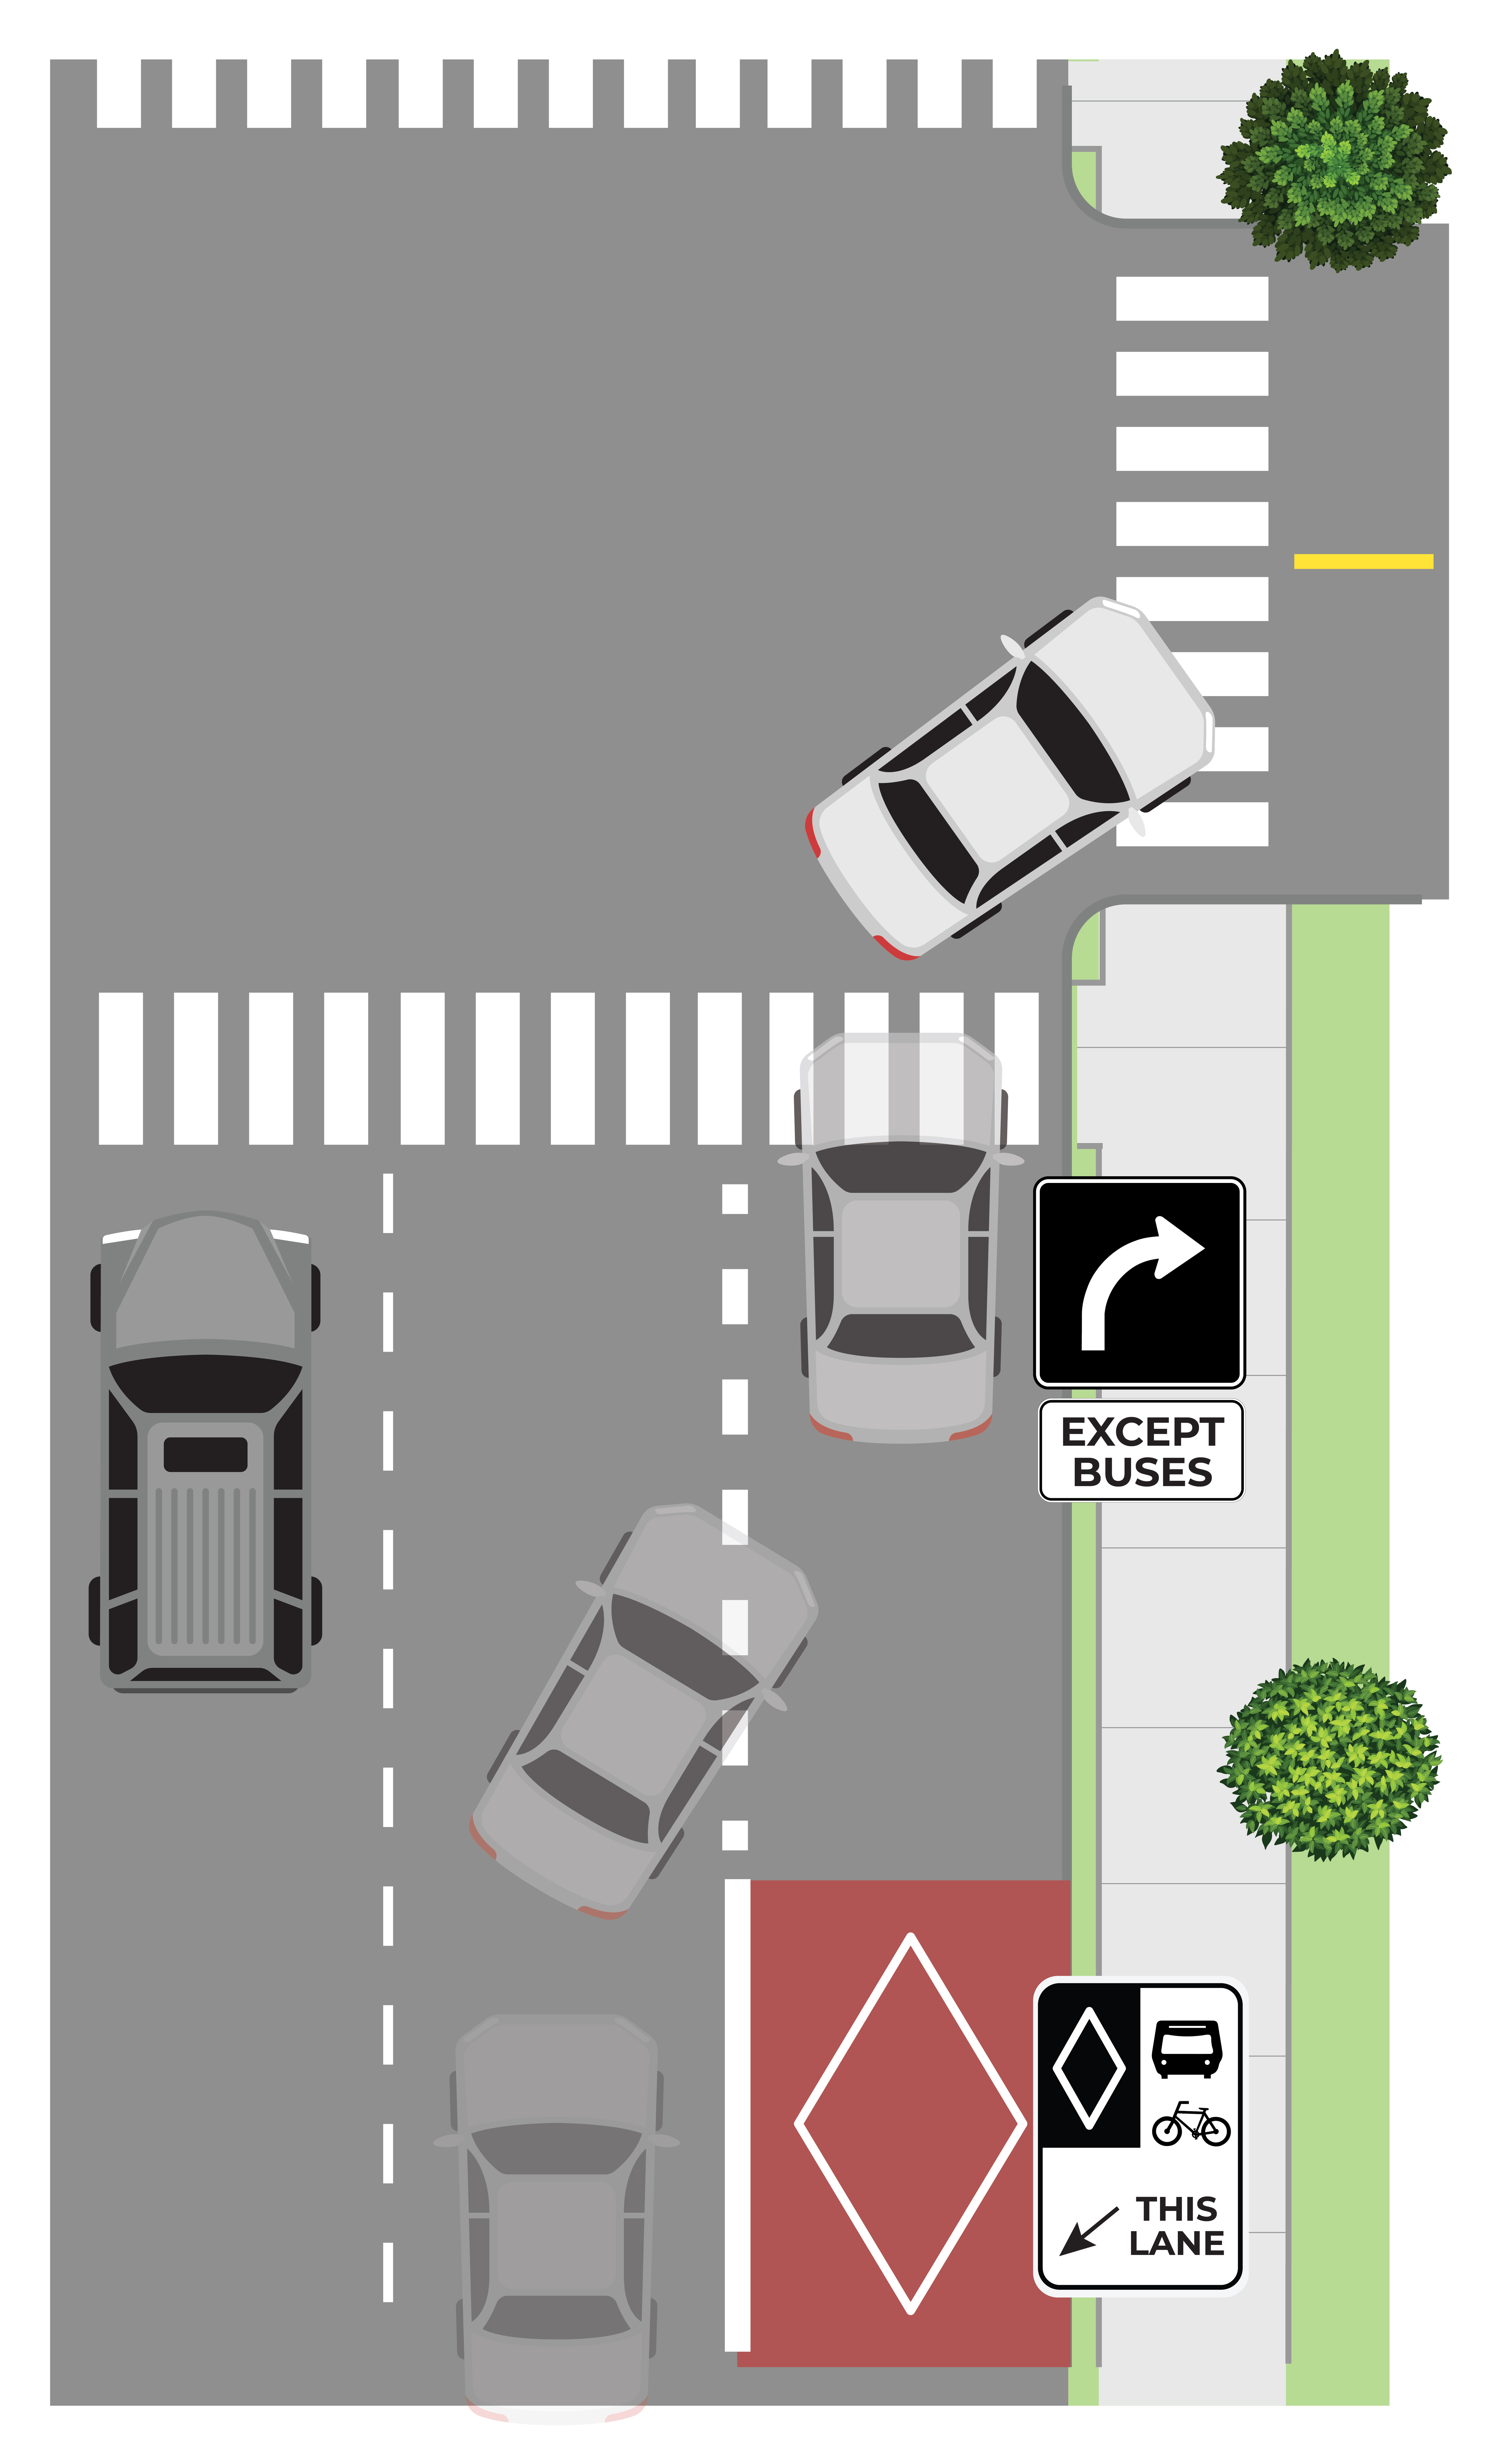 Bus lane shared right turn graphic